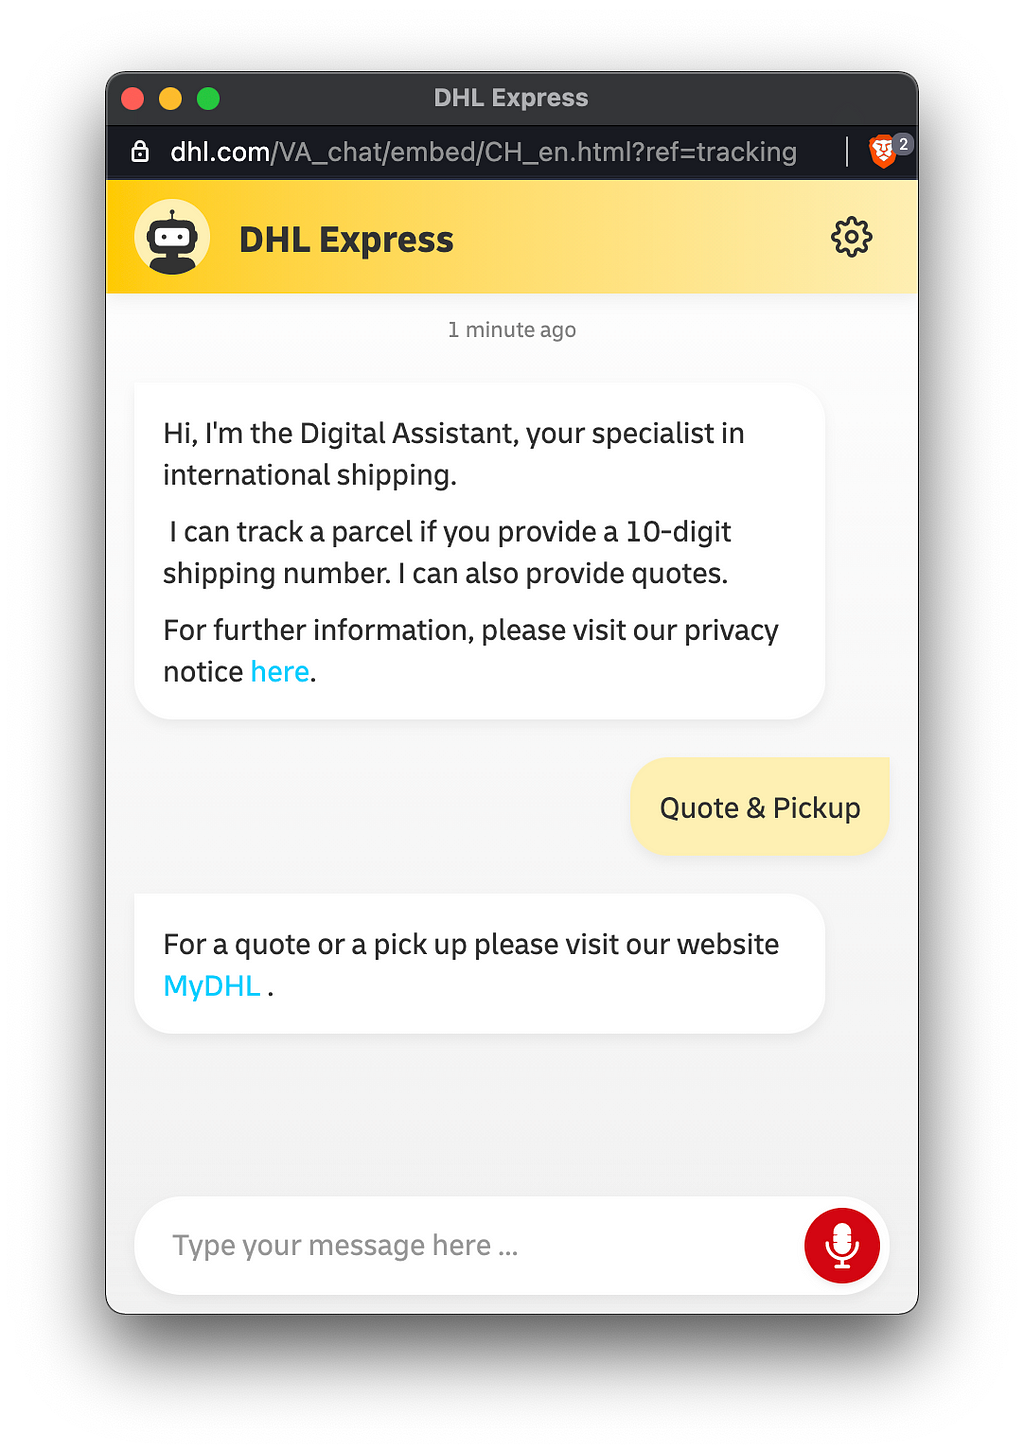 DHL chatbot discussion about quotes and pickups options